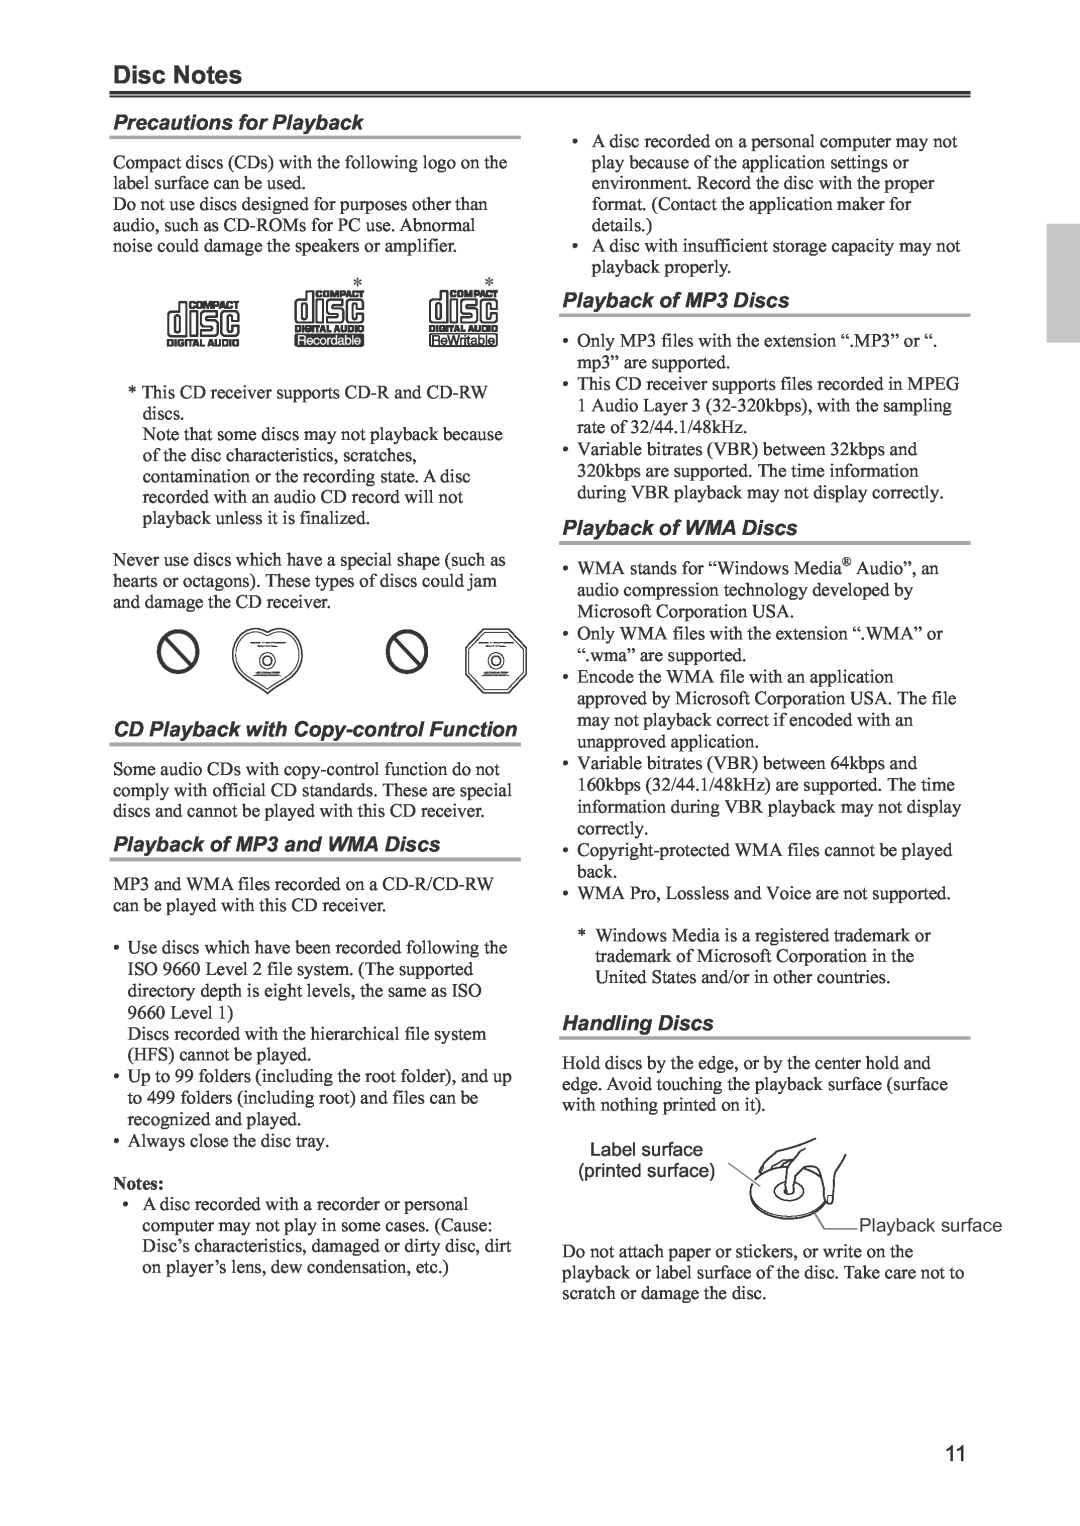 Onkyo CR-445 Disc Notes, Precautions for Playback, CD Playback with Copy-controlFunction, Playback of MP3 and WMA Discs 